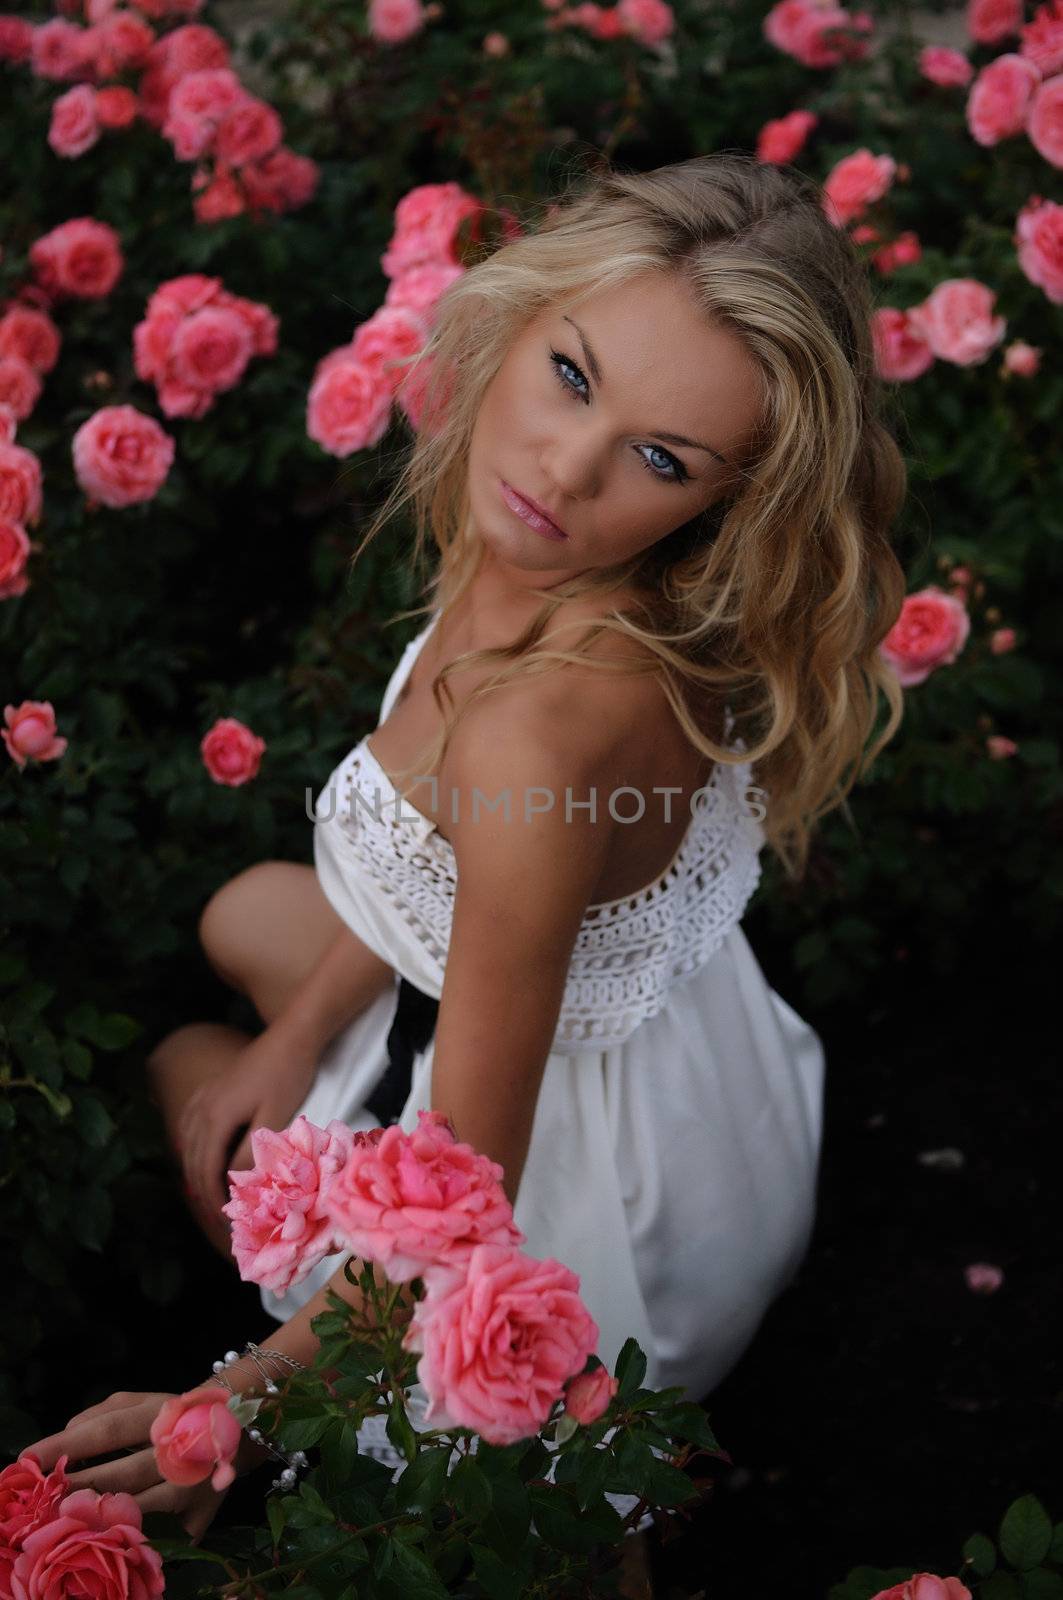 Smiing Blond In Pink Roses by peterveiler